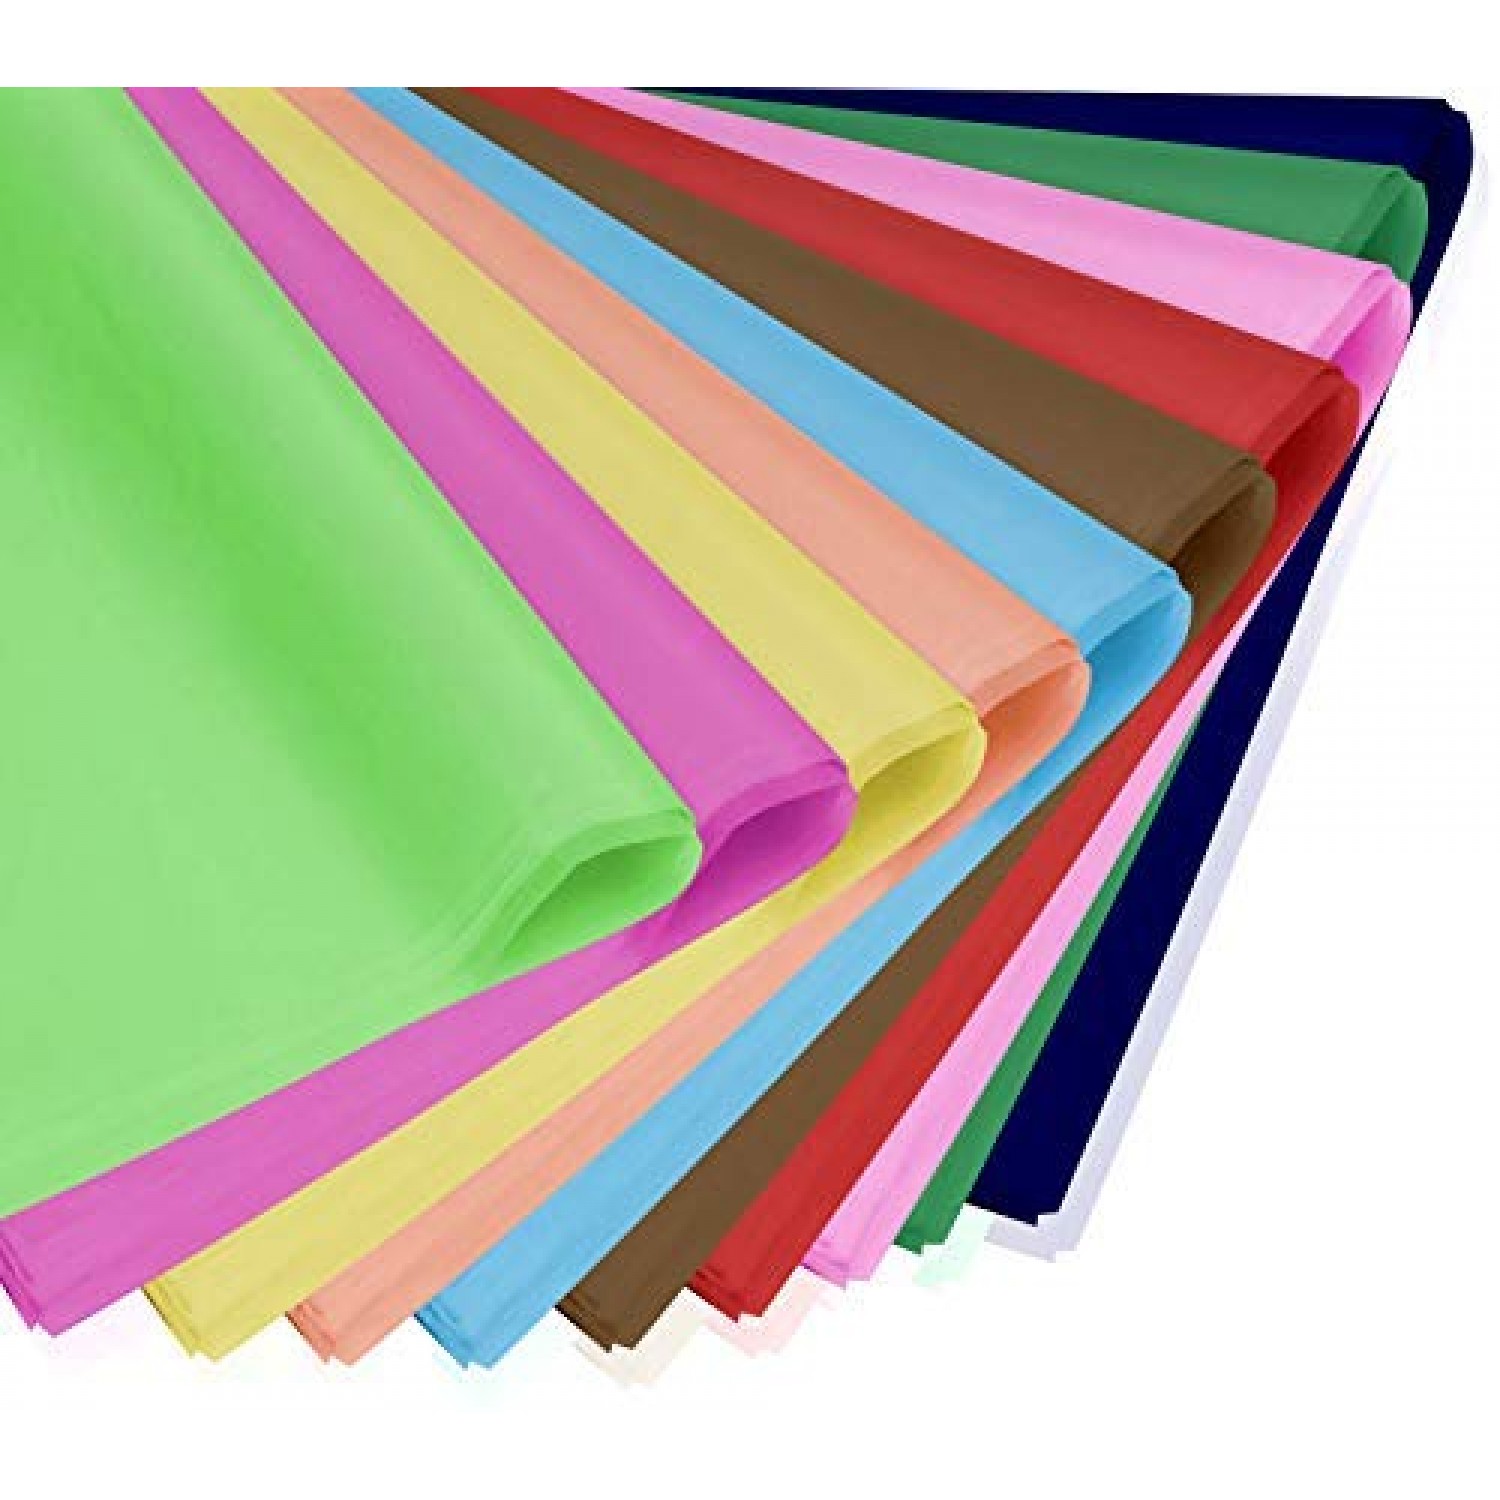  Colors of Rainbow Gift Wrapping Tissue Paper (48